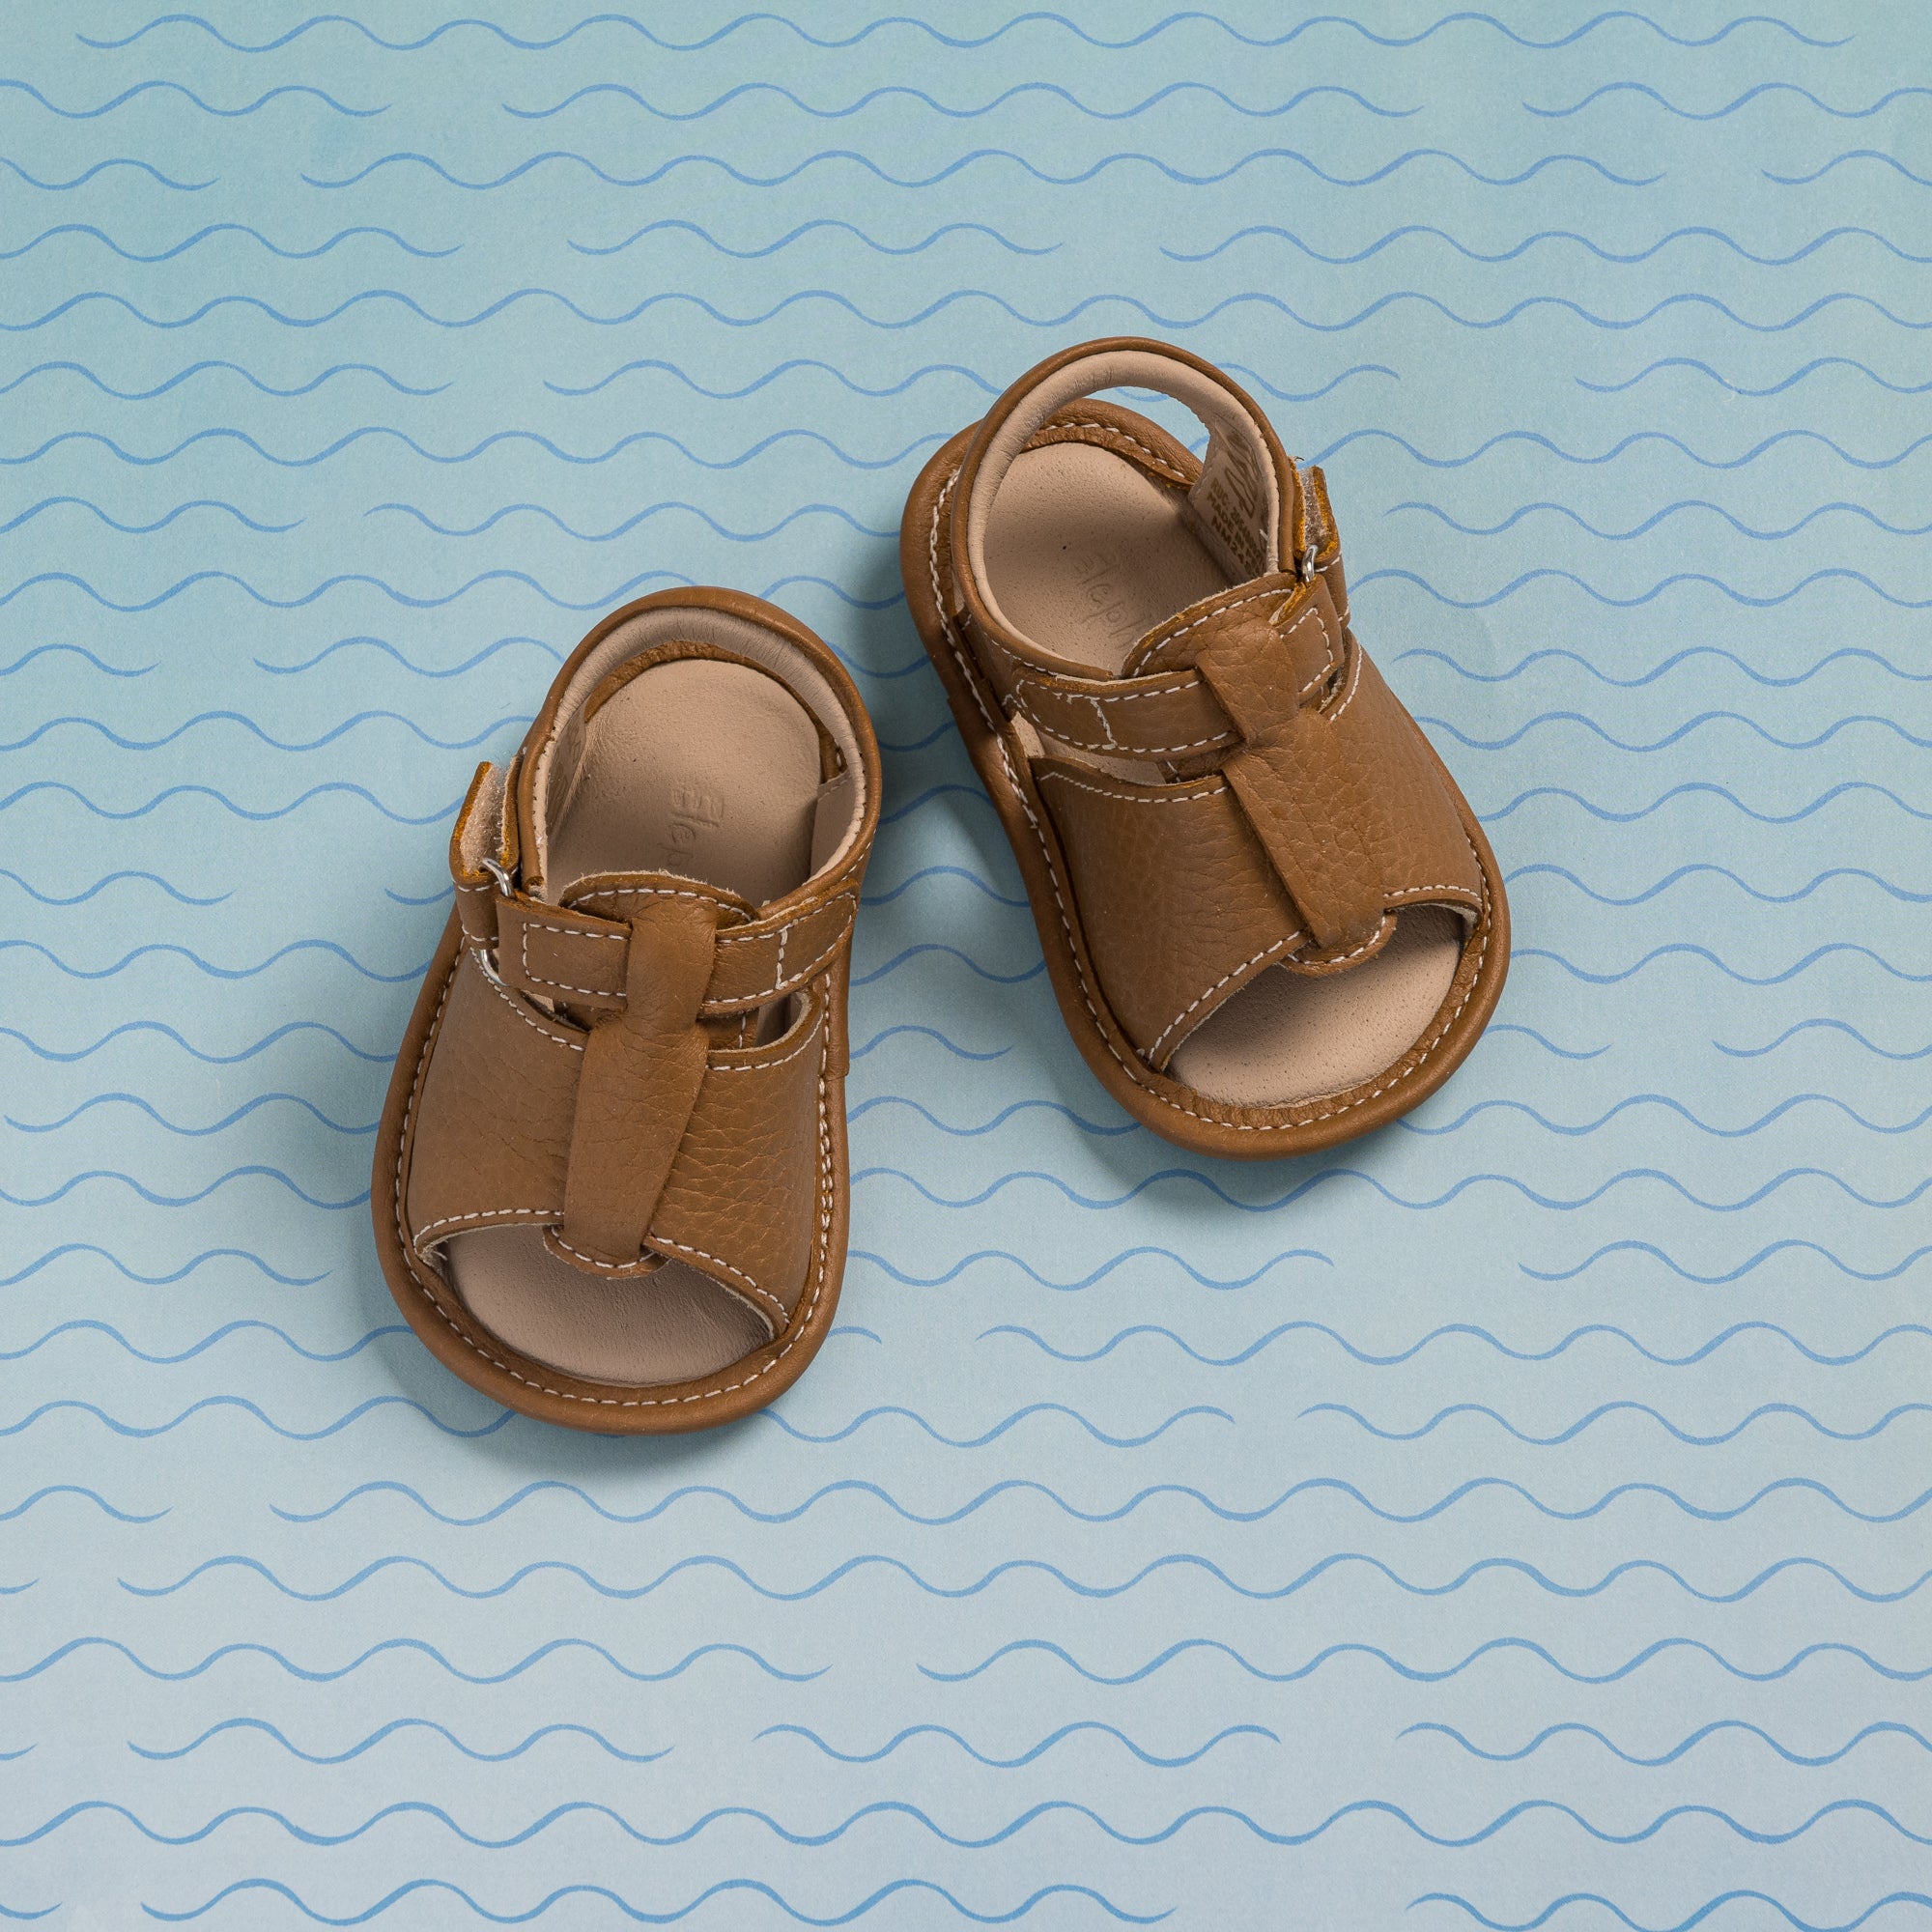 Amazon.com: Baby Boy Sandals Baby Girls Boys Sandals Infant Summer Beach  Shoes Outdoor Casual Slipper Rubber Sole Toddler First (Brown, 5.5 Infant)  : Clothing, Shoes & Jewelry